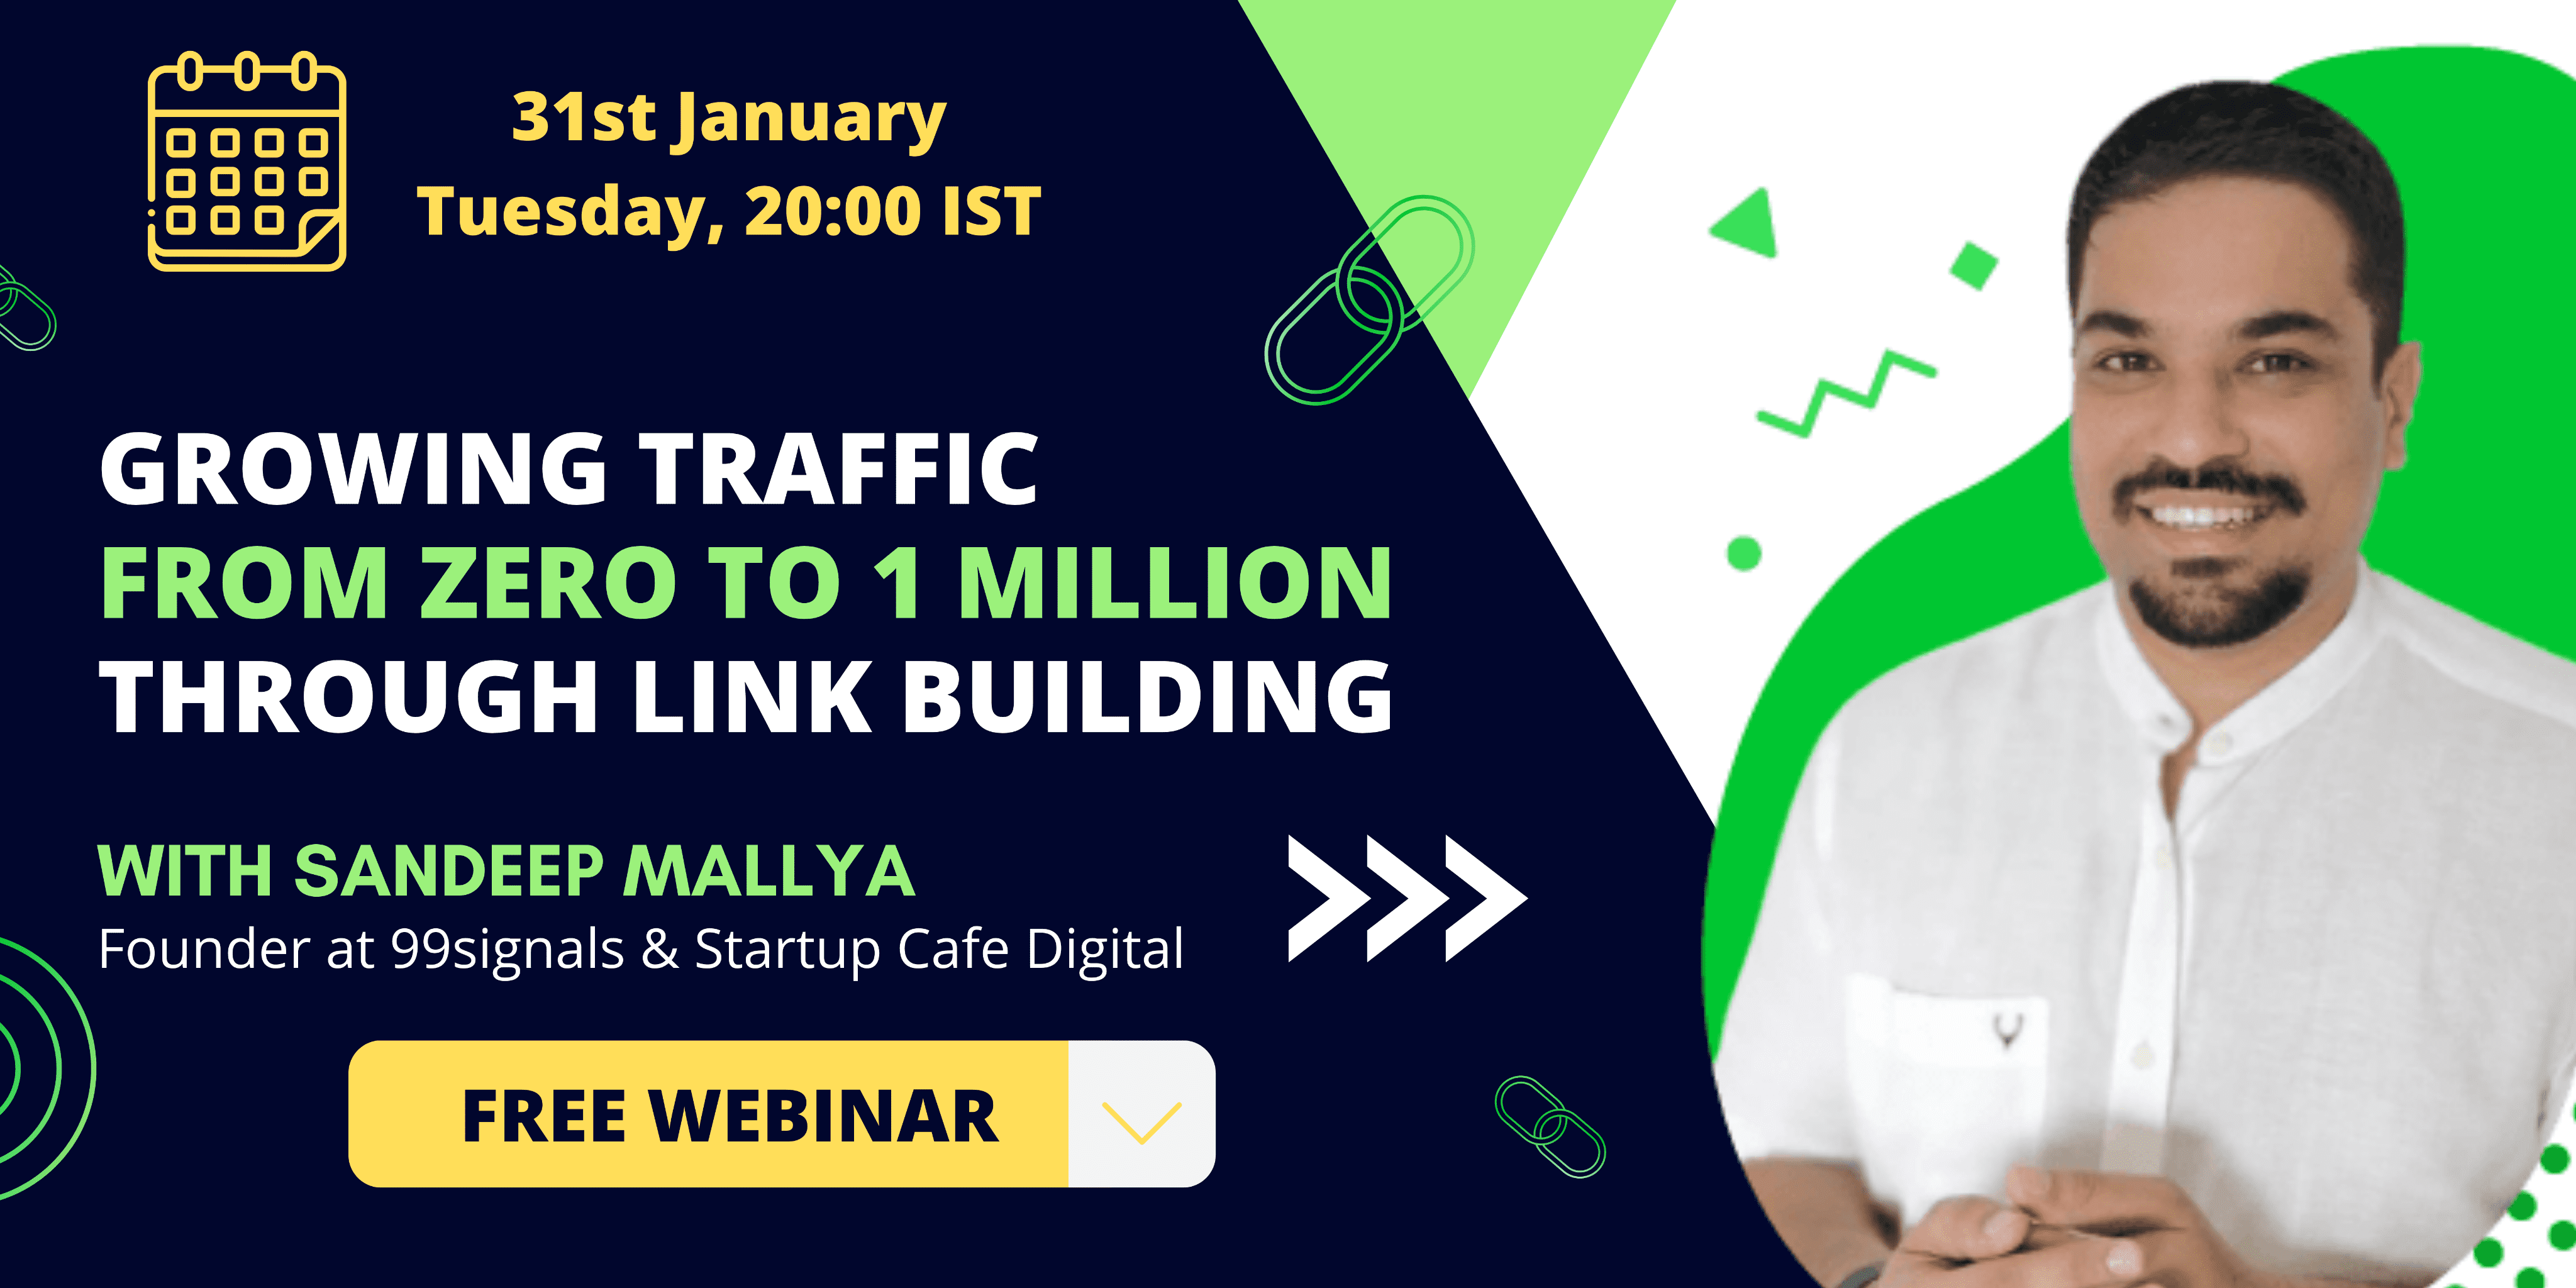 Growing Traffic from 0 to 1 Million Through Link Building with Sandeep Mallya